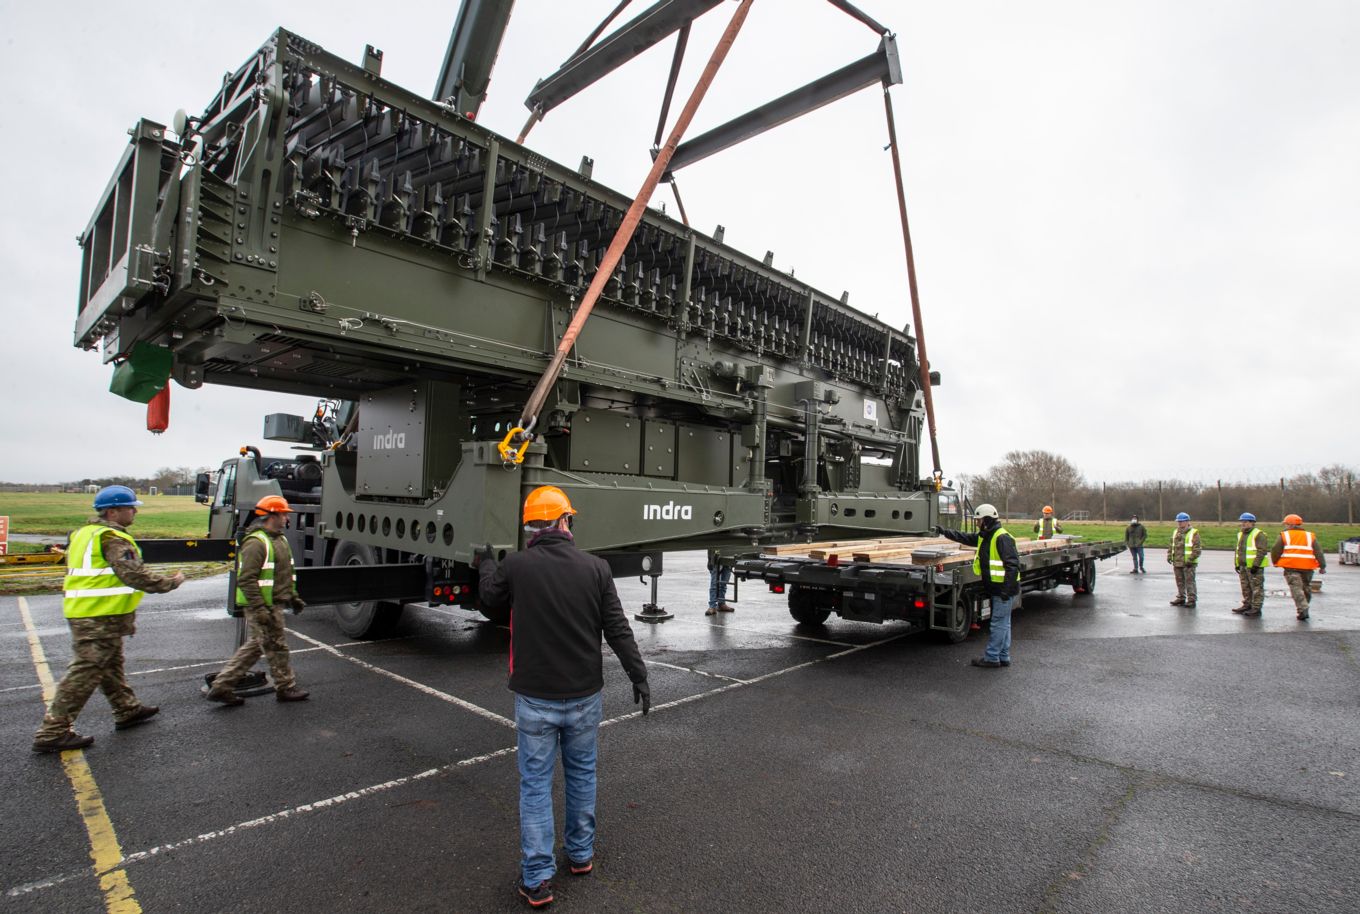 deployable radar being moved by RAF personnel